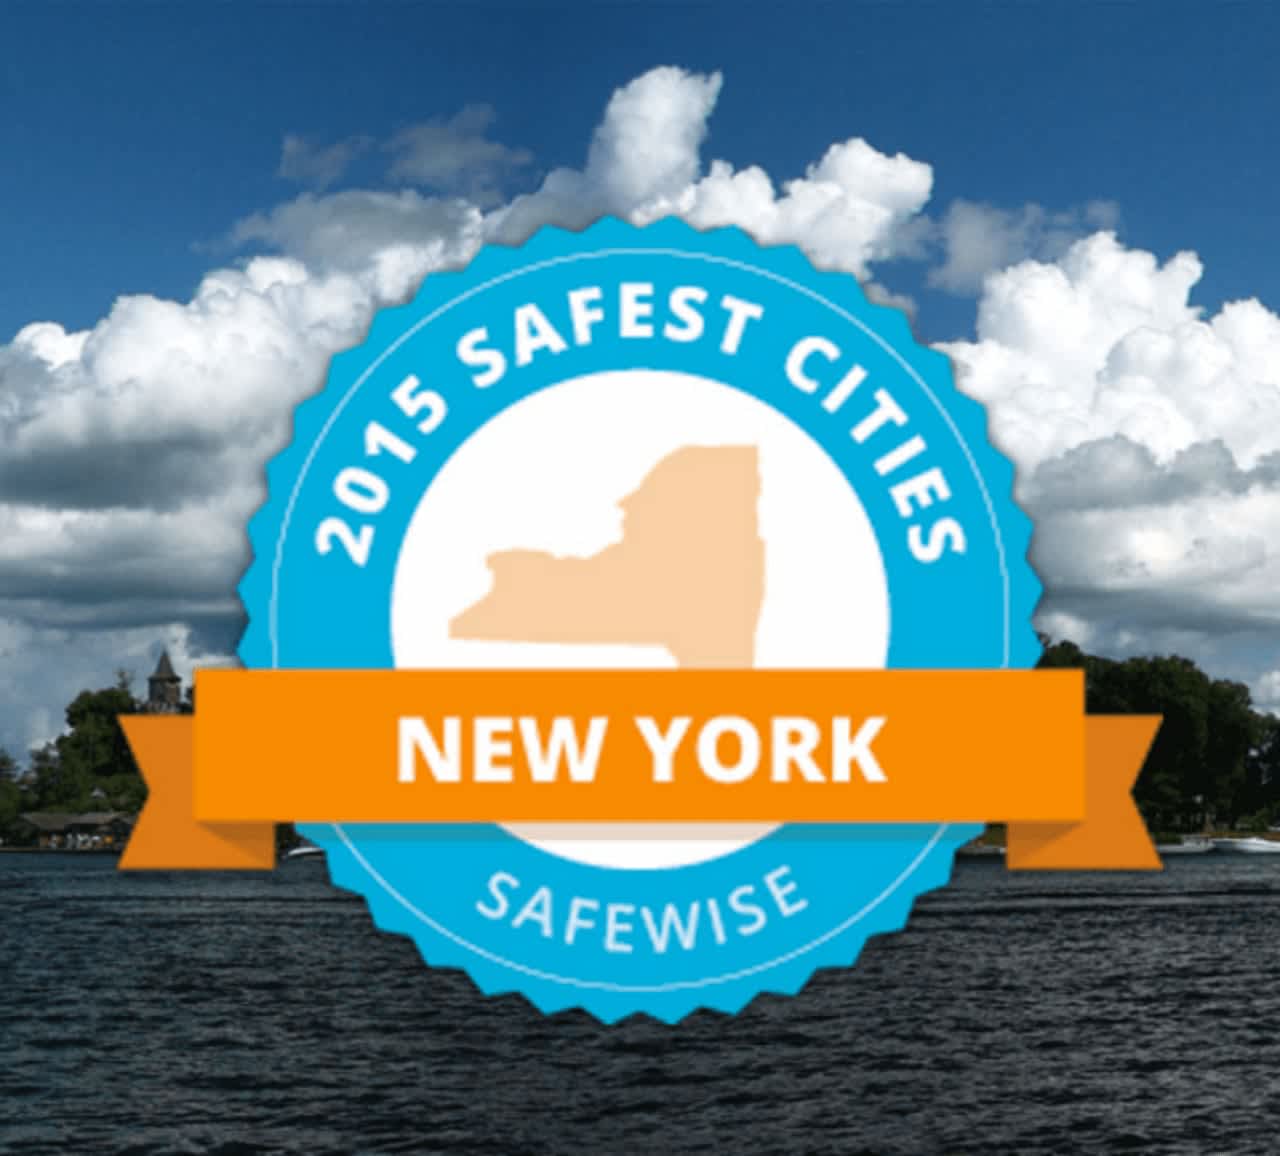 The survey of safest places to live was conducted by safewise.com, a home security business.